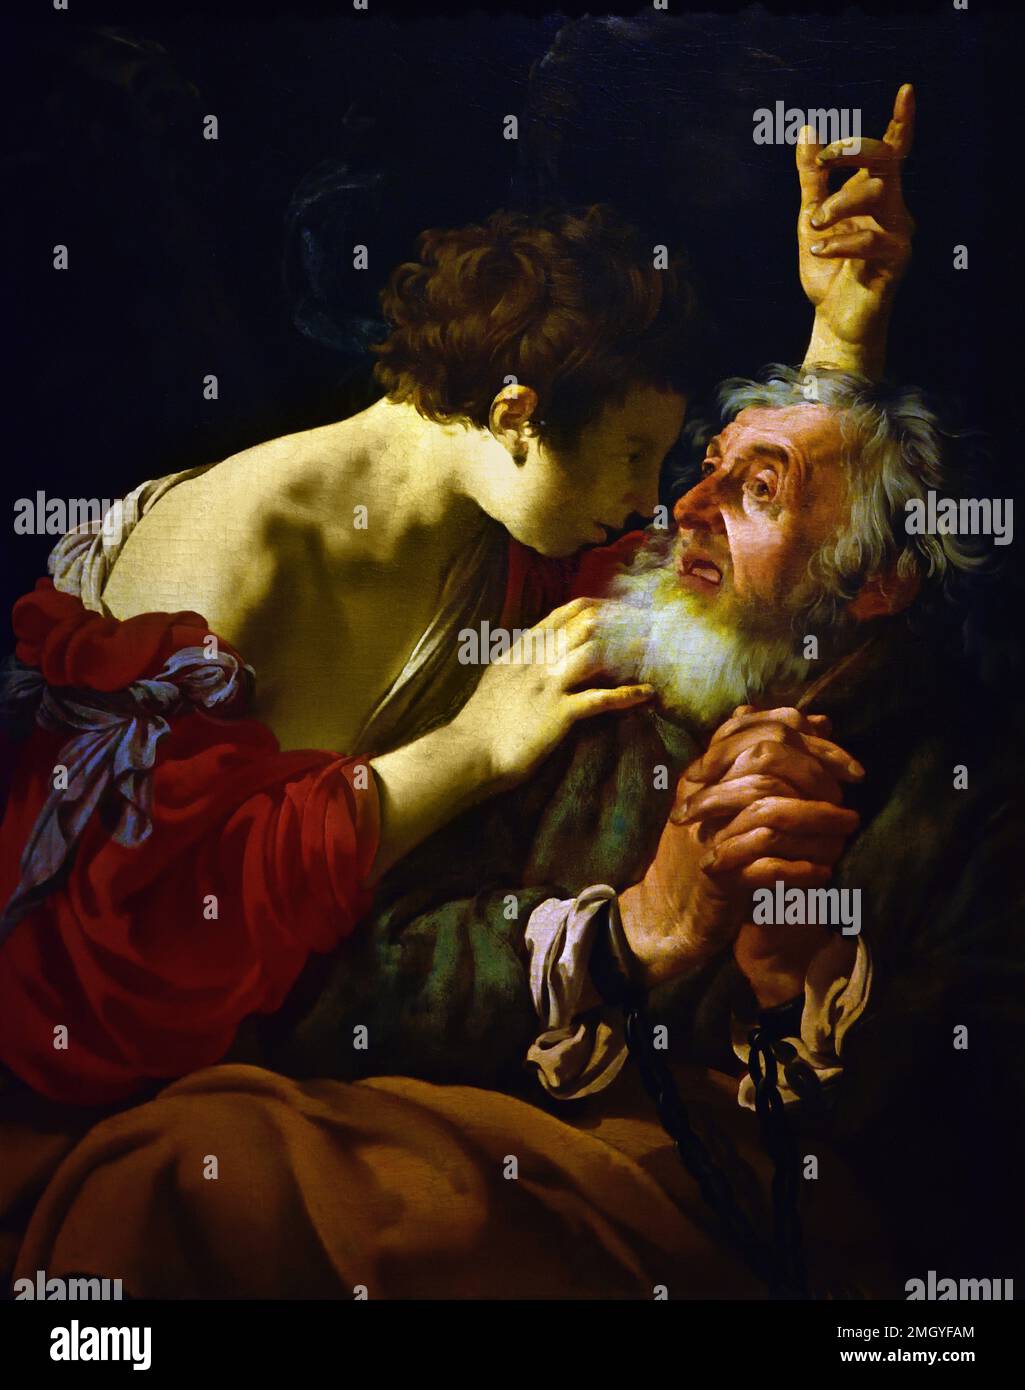 The Liberation of St Peter 1624 by Hendrick ter Brugghen, Dutch, The Netherlands  1588-1629 Dutch Netherlands ,( Caravaggists, Style of Caravaggio) Stock Photo